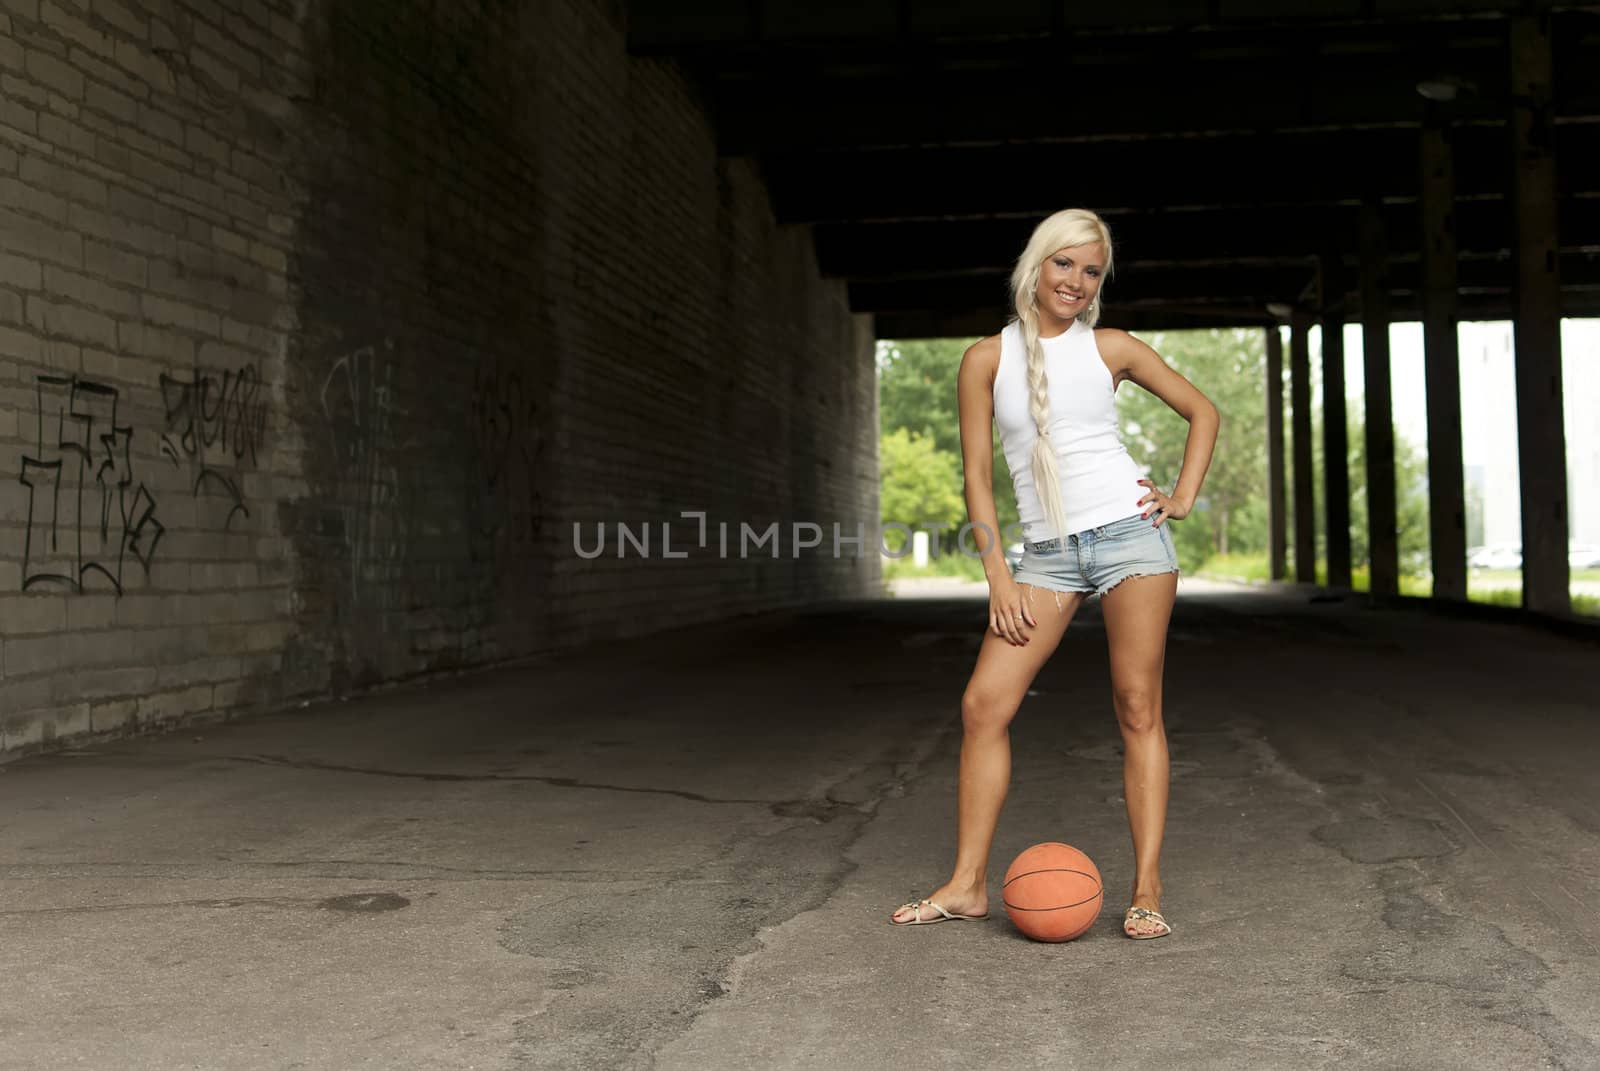 Beautiful blonde girl standing with basketball in the street